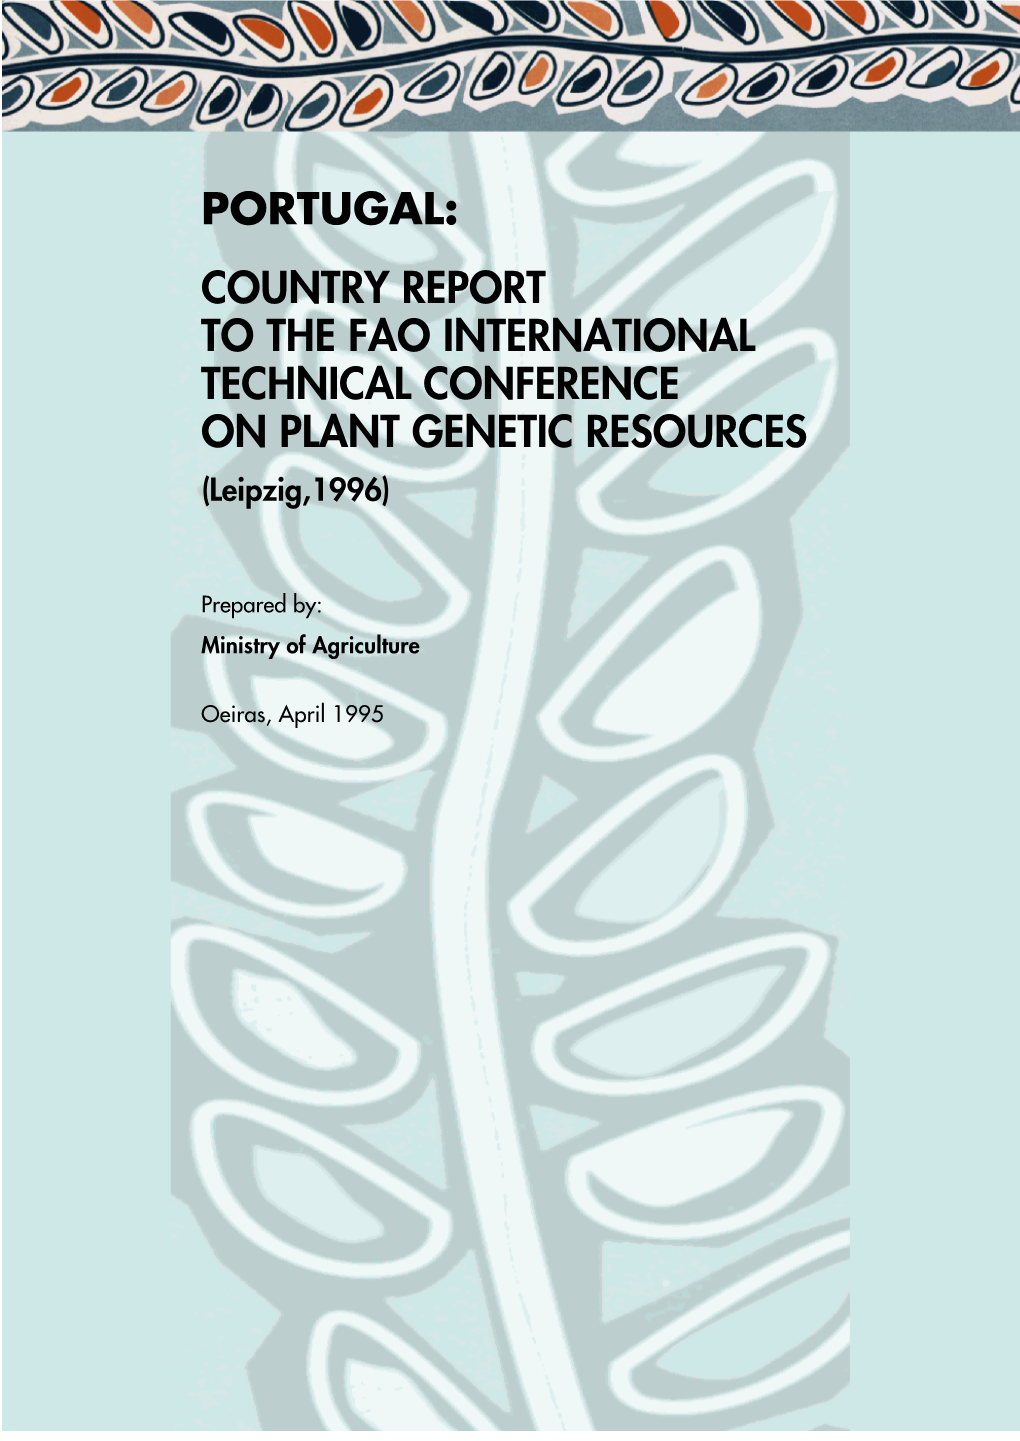 PORTUGAL: COUNTRY REPORT to the FAO INTERNATIONAL TECHNICAL CONFERENCE on PLANT GENETIC RESOURCES (Leipzig,1996)